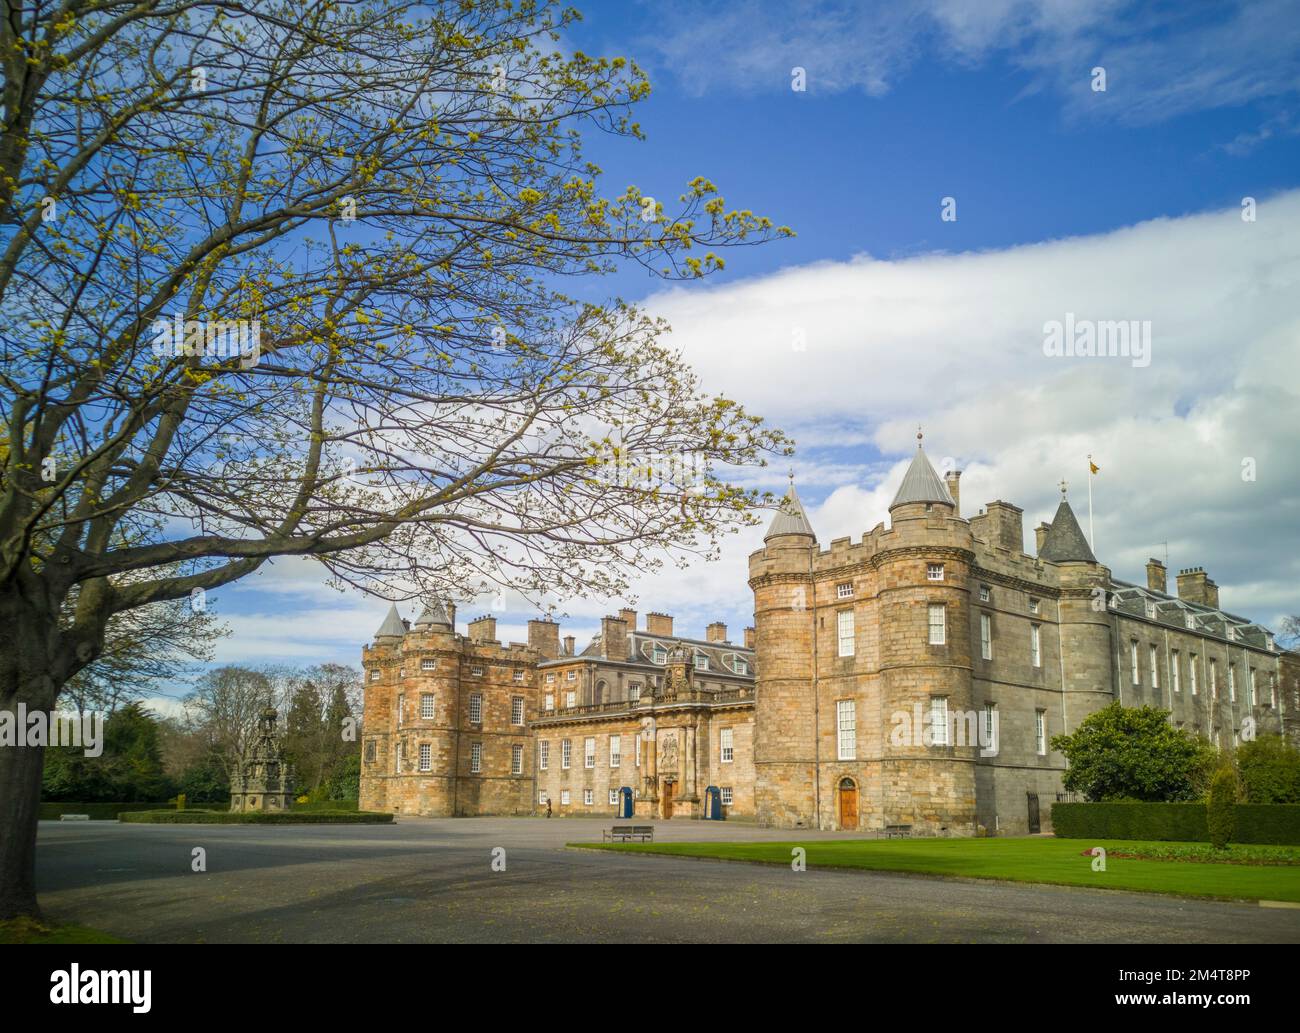 6th April 2022. Scotland, UK weather. Blue skies today at The Palace of Holyroodhouse, Edinburgh, Scotland.  Commonly referred to as Holyrood Palace o Stock Photo